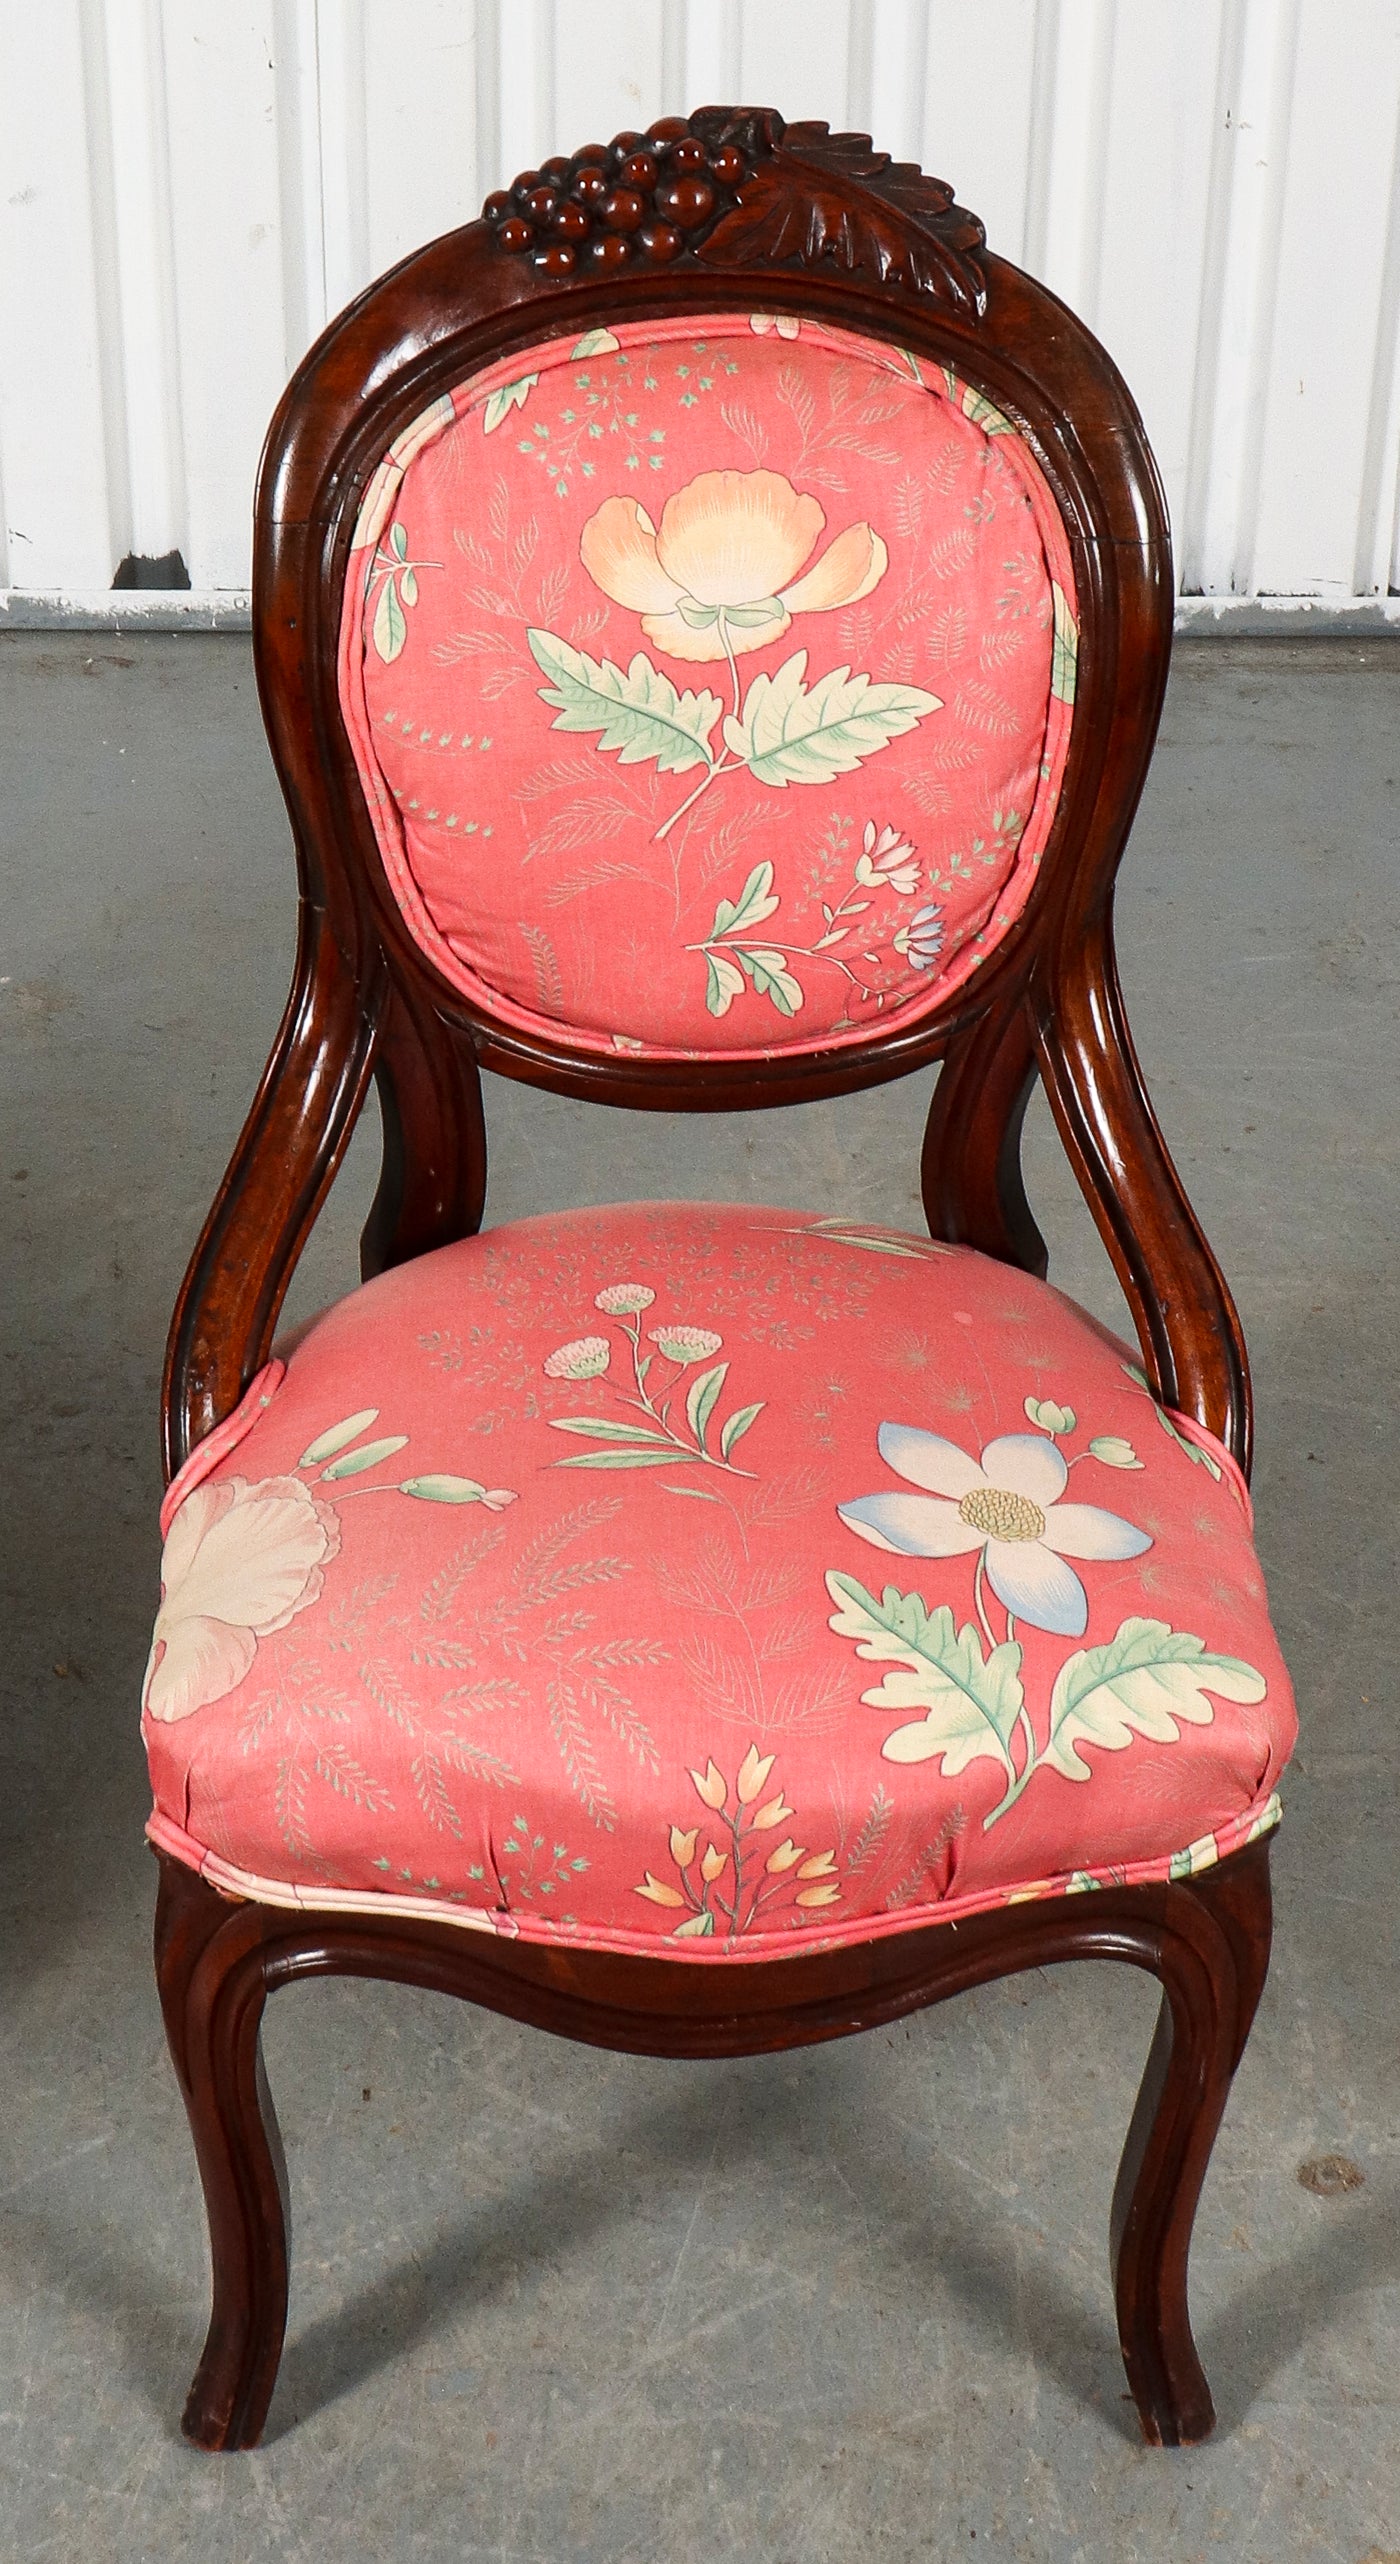 American Rococo Revival Style Wooden Chairs, 4 – Showplace